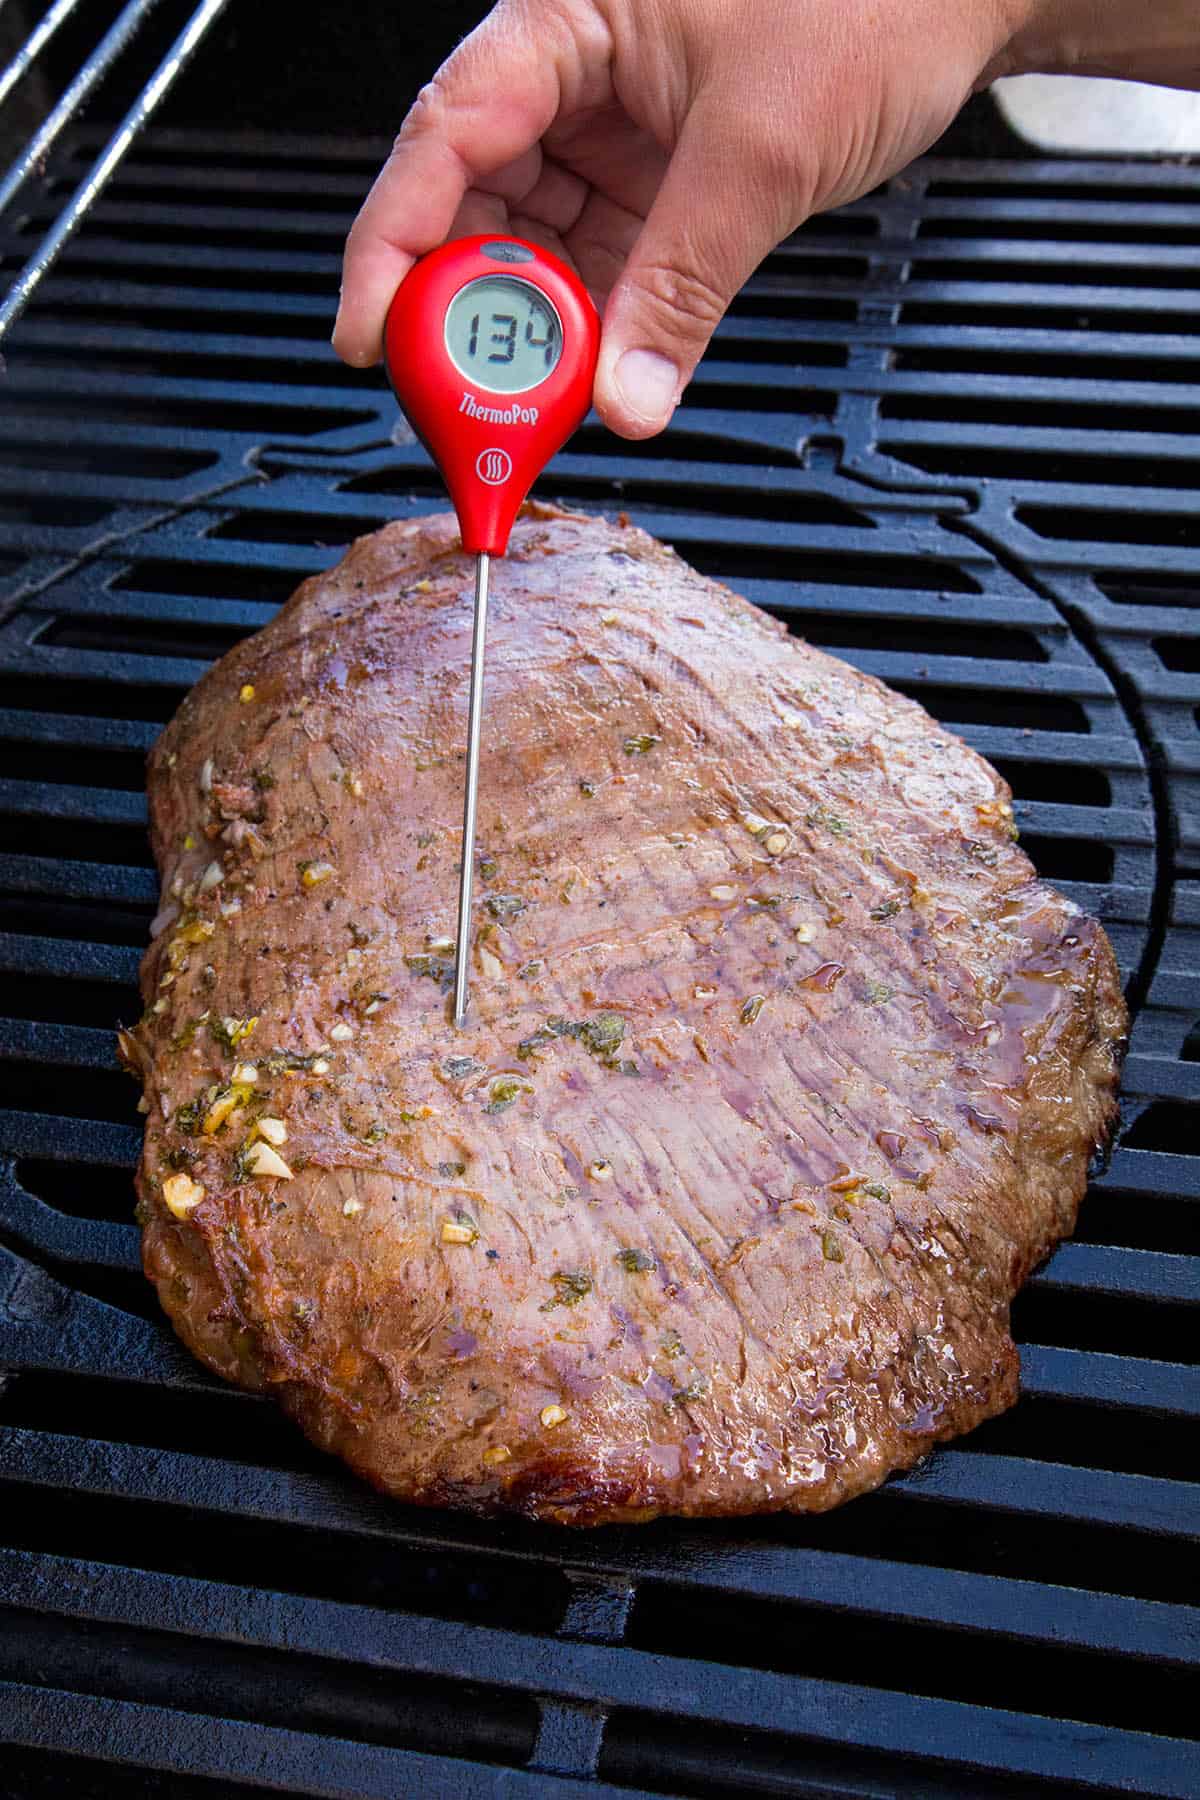 Checking the internal temperature of my flank steak